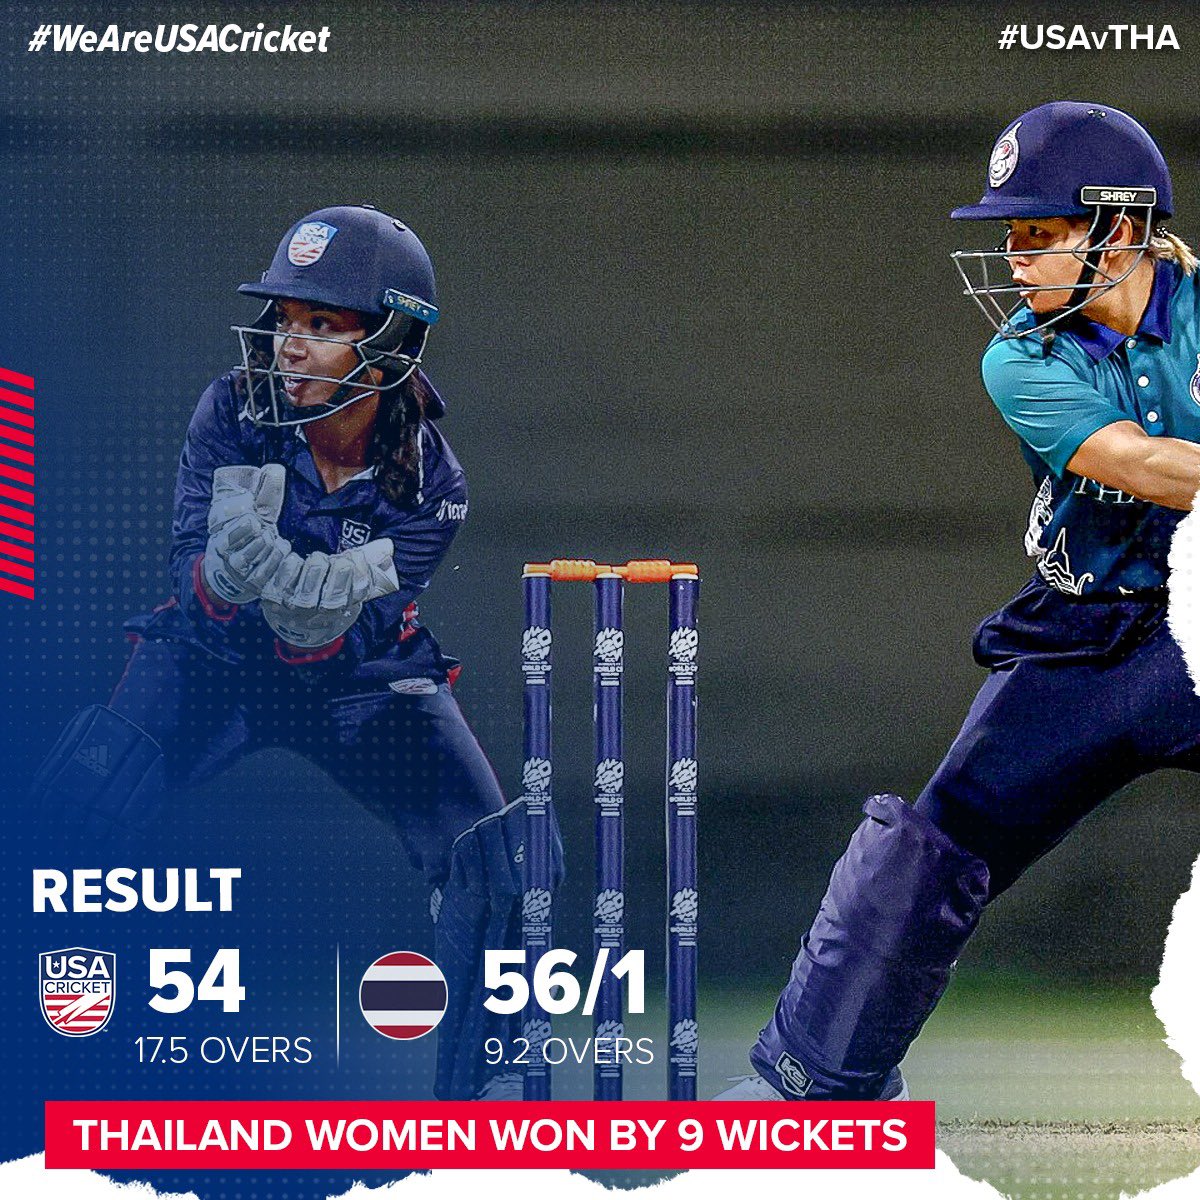 A devastating result in Abu Dhabi as Thailand Women prevail by 9 wickets.

Stay tuned for USA’s next match on May 3rd against Sri Lanka on Icc.tv!

#USAvTHI #WeAreUSACricket 🇺🇸